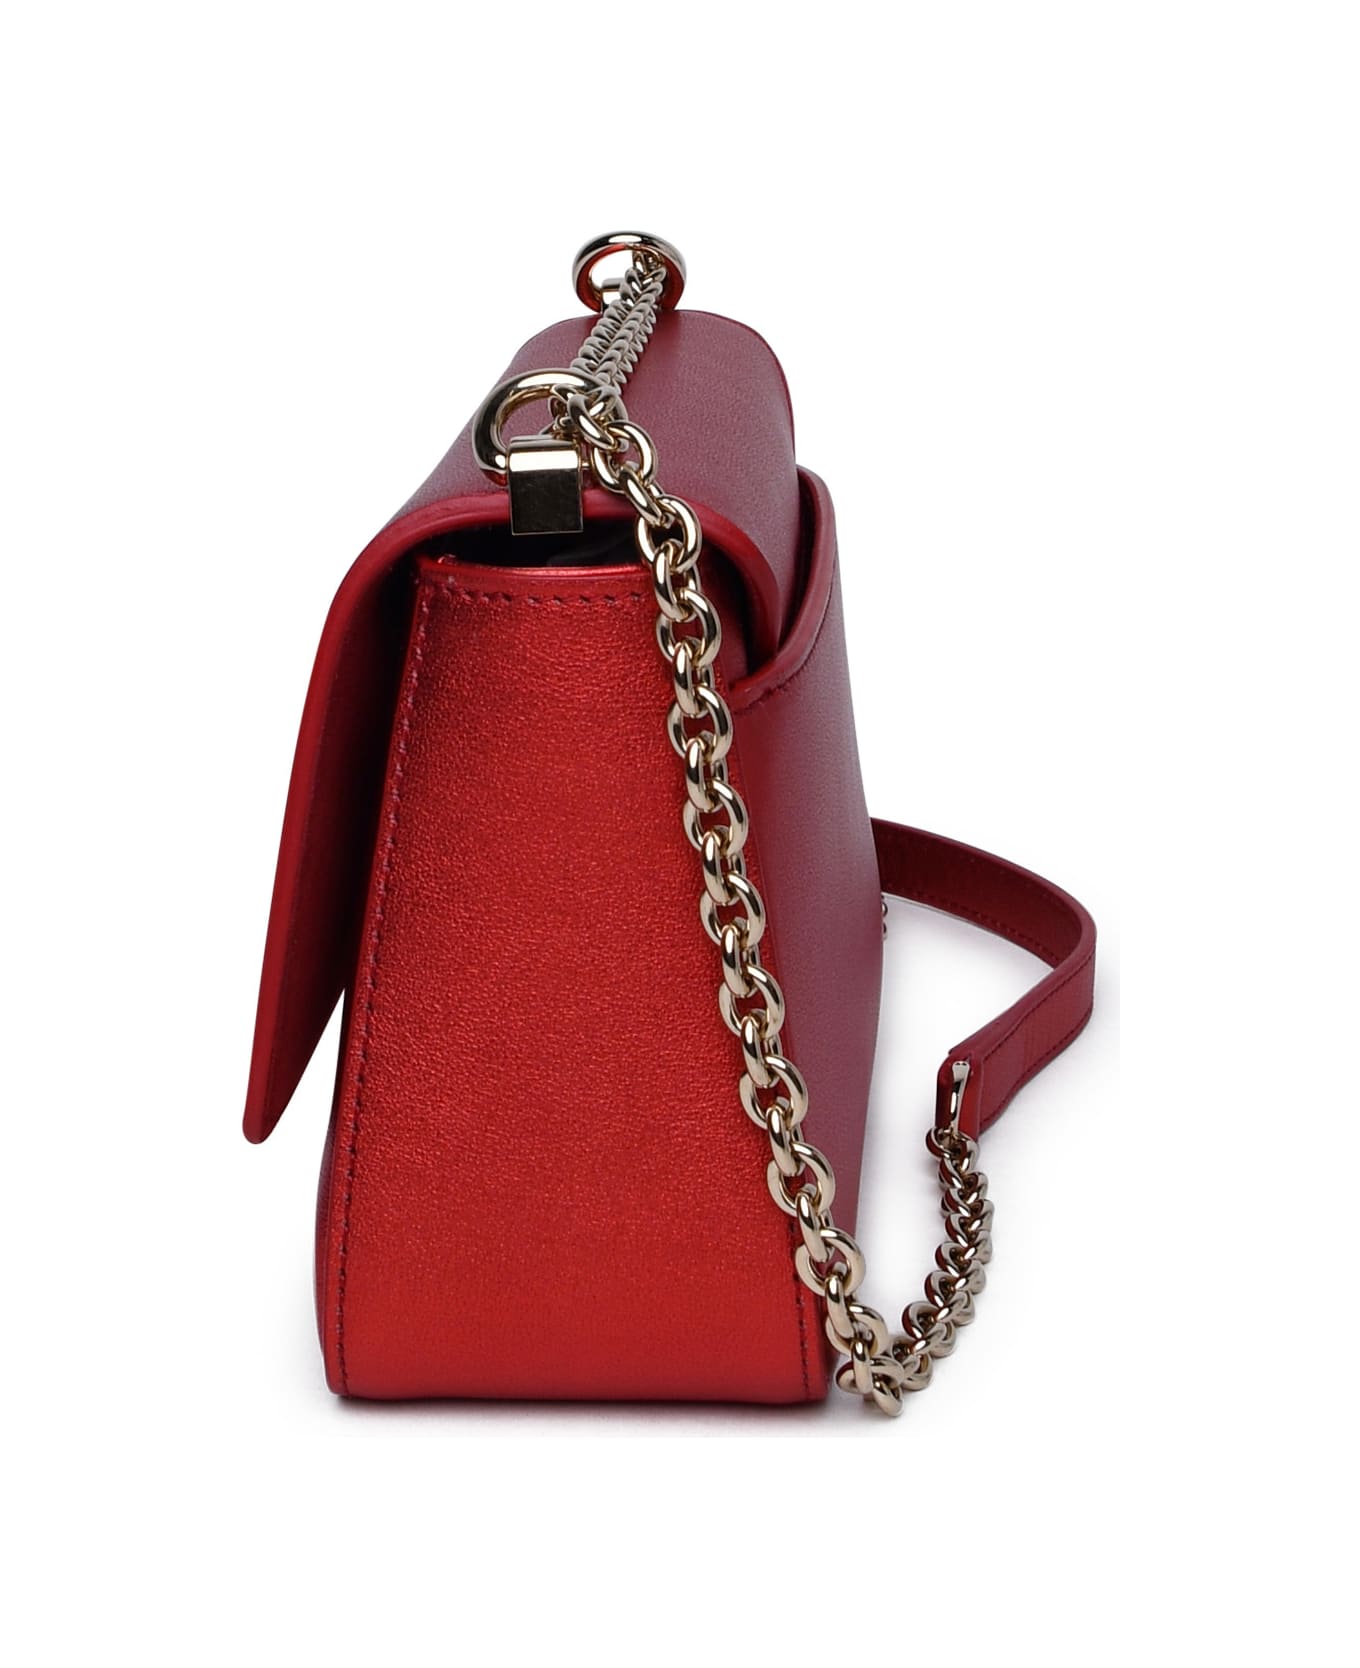 Furla Red Leather Bag - Red